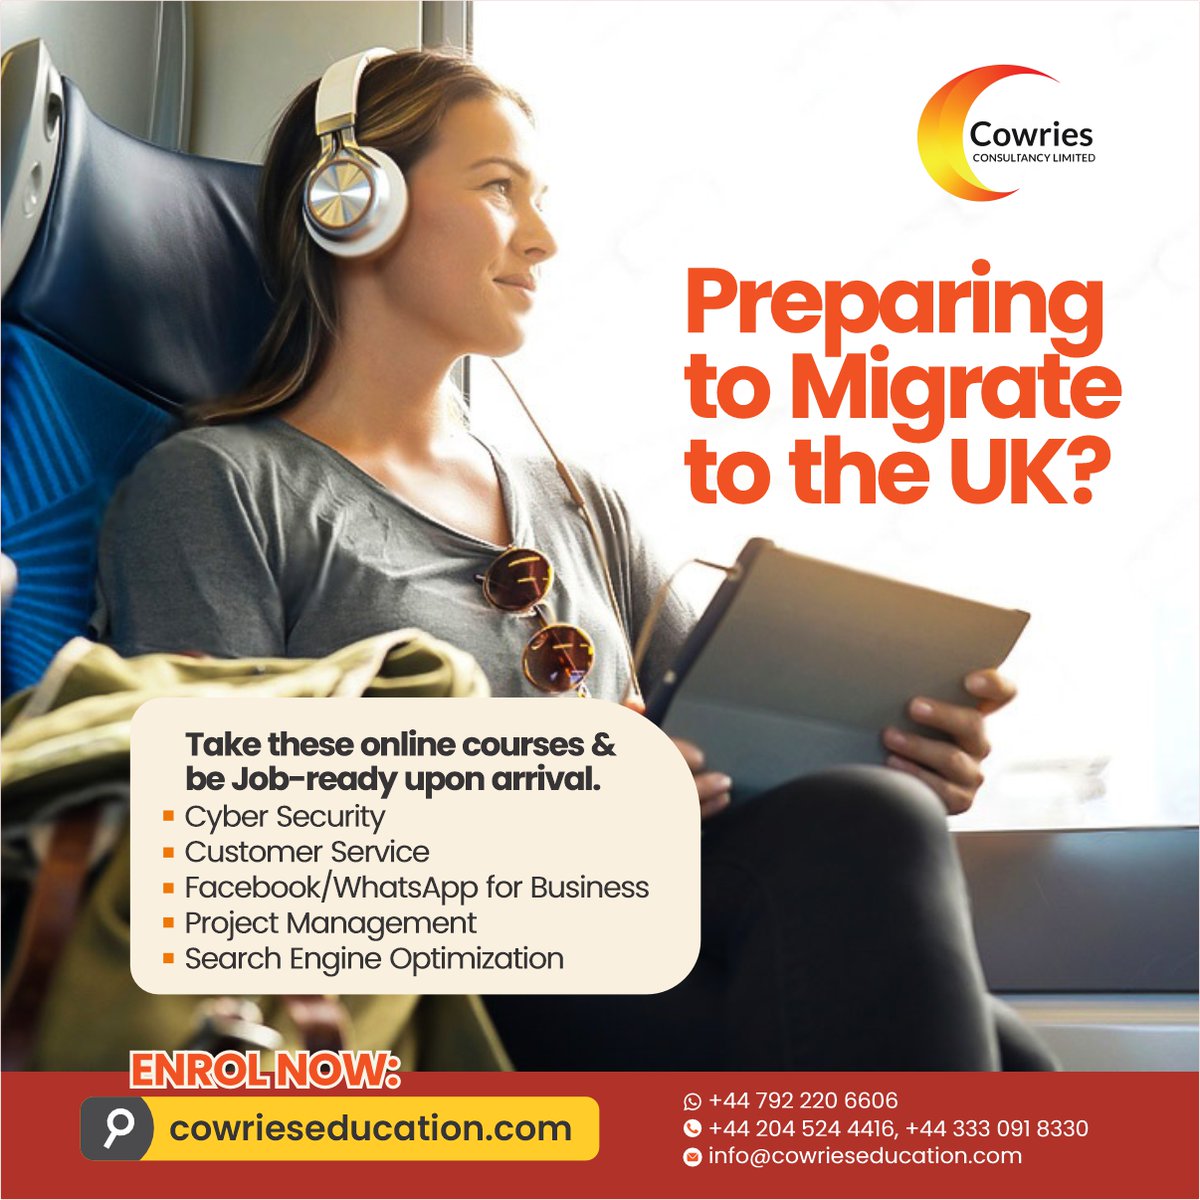 Embarking on a new journey to the UK? Get a head start with Cowries Education! Our specialized online courses are designed to make you job-ready from the moment you arrive. #UKMigration #JobReadyUK #CowriesEducation #UKJobMarket #SucceedInUK #OnlineCoursesUK #StudyInUK